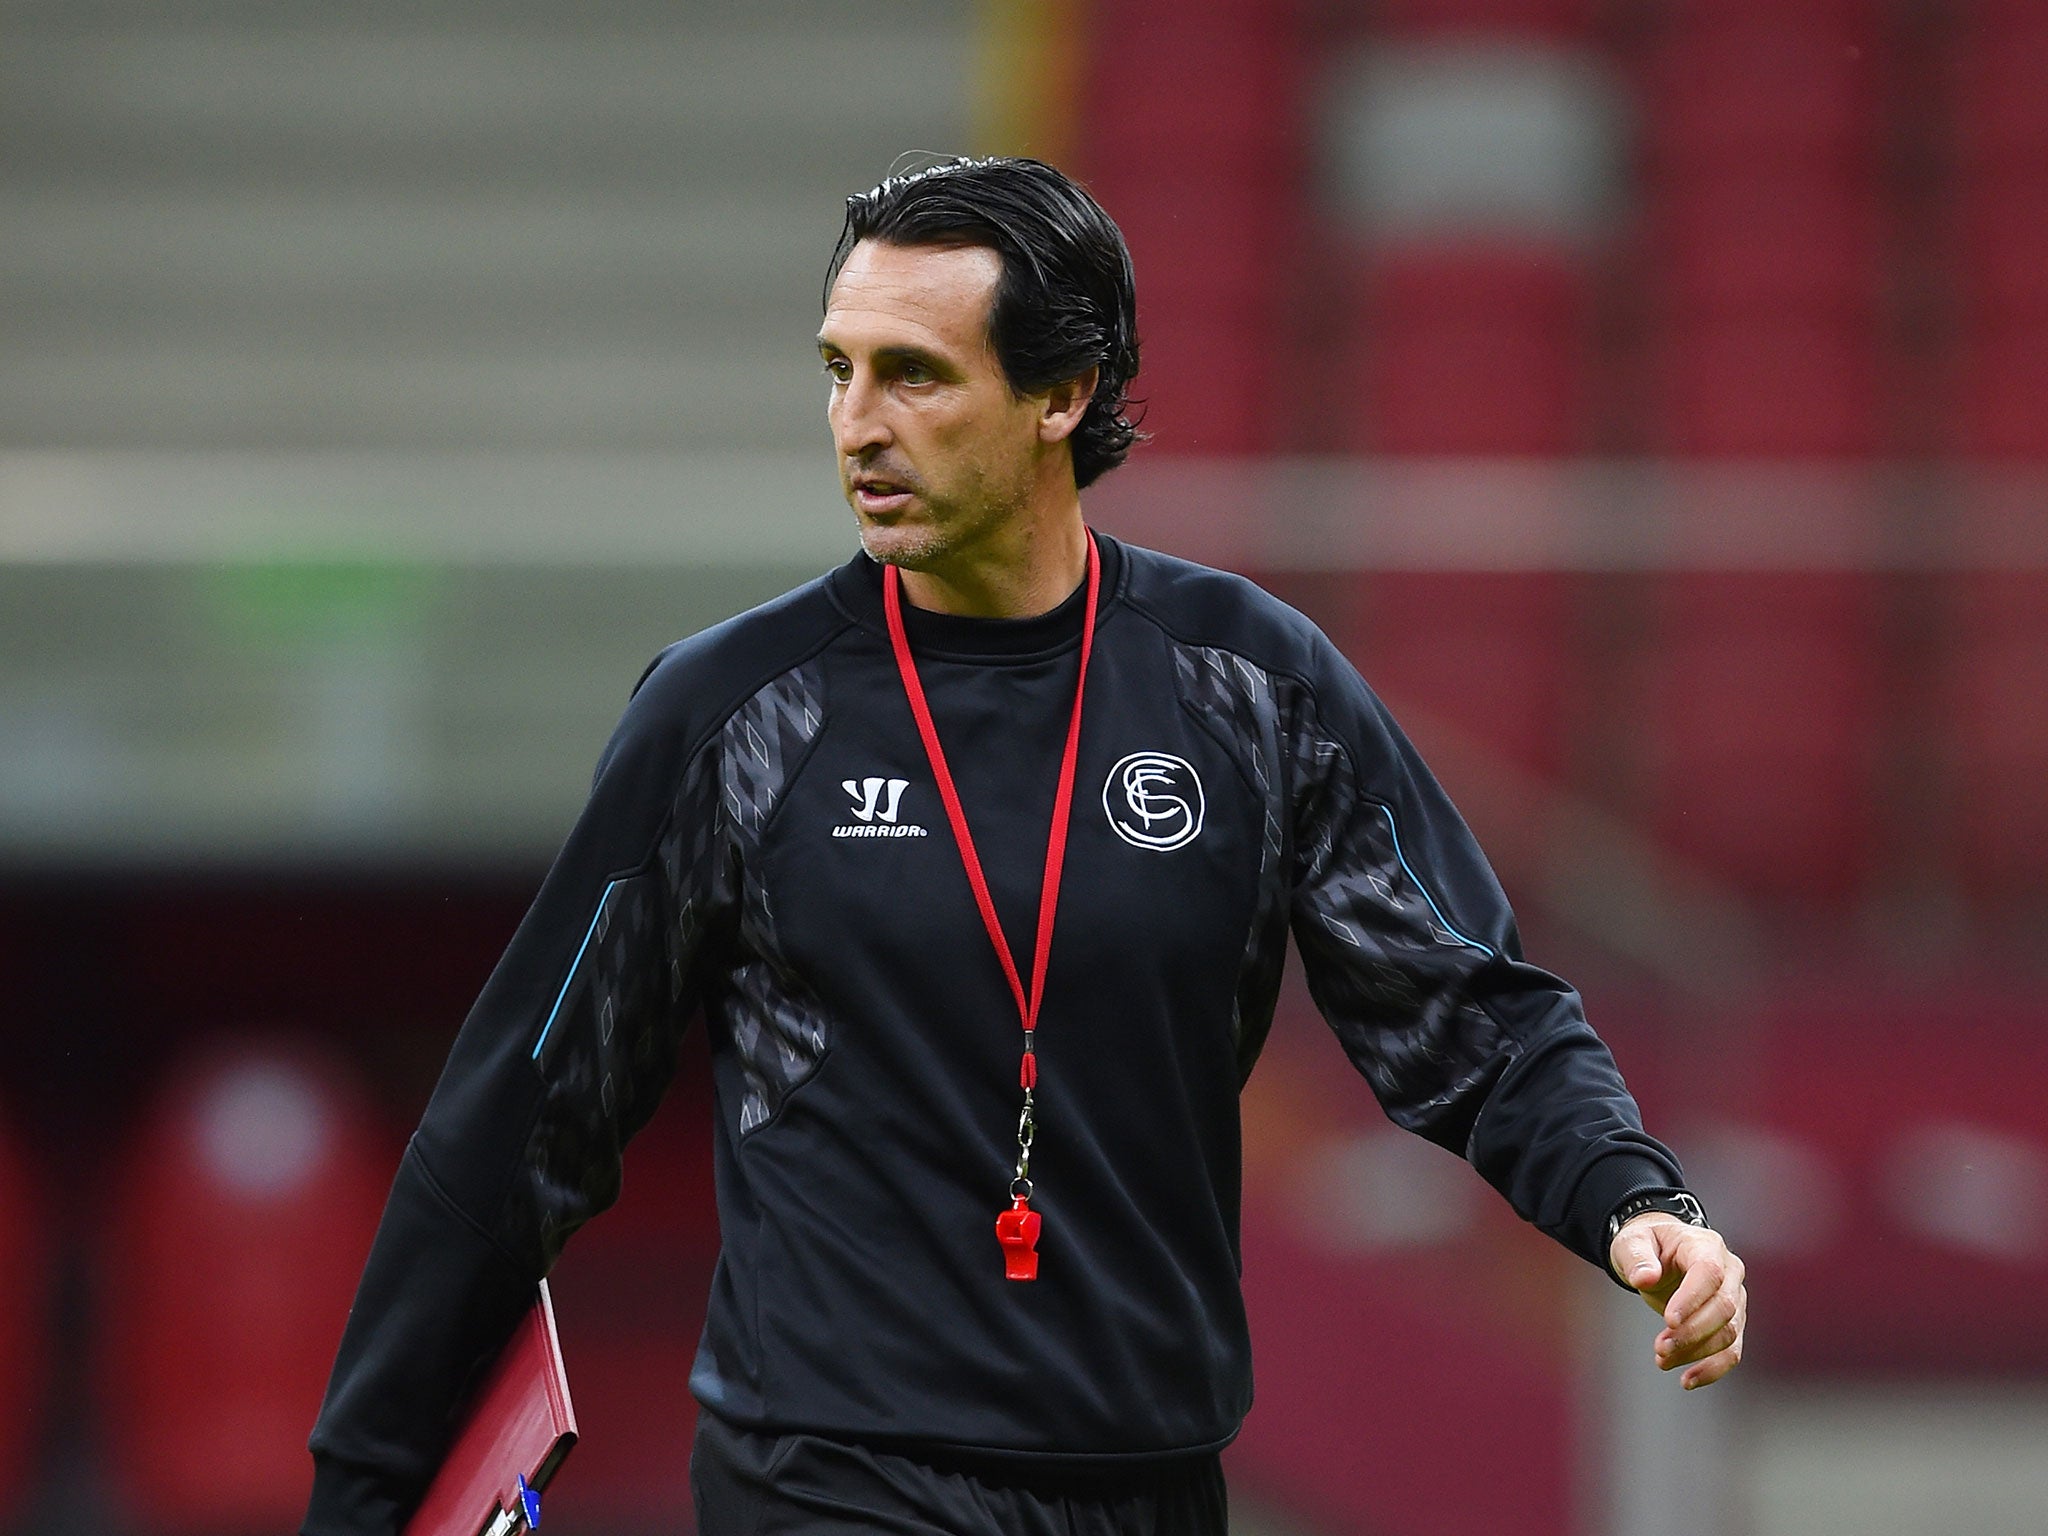 Unai Emery is in London this week for talks with West Ham